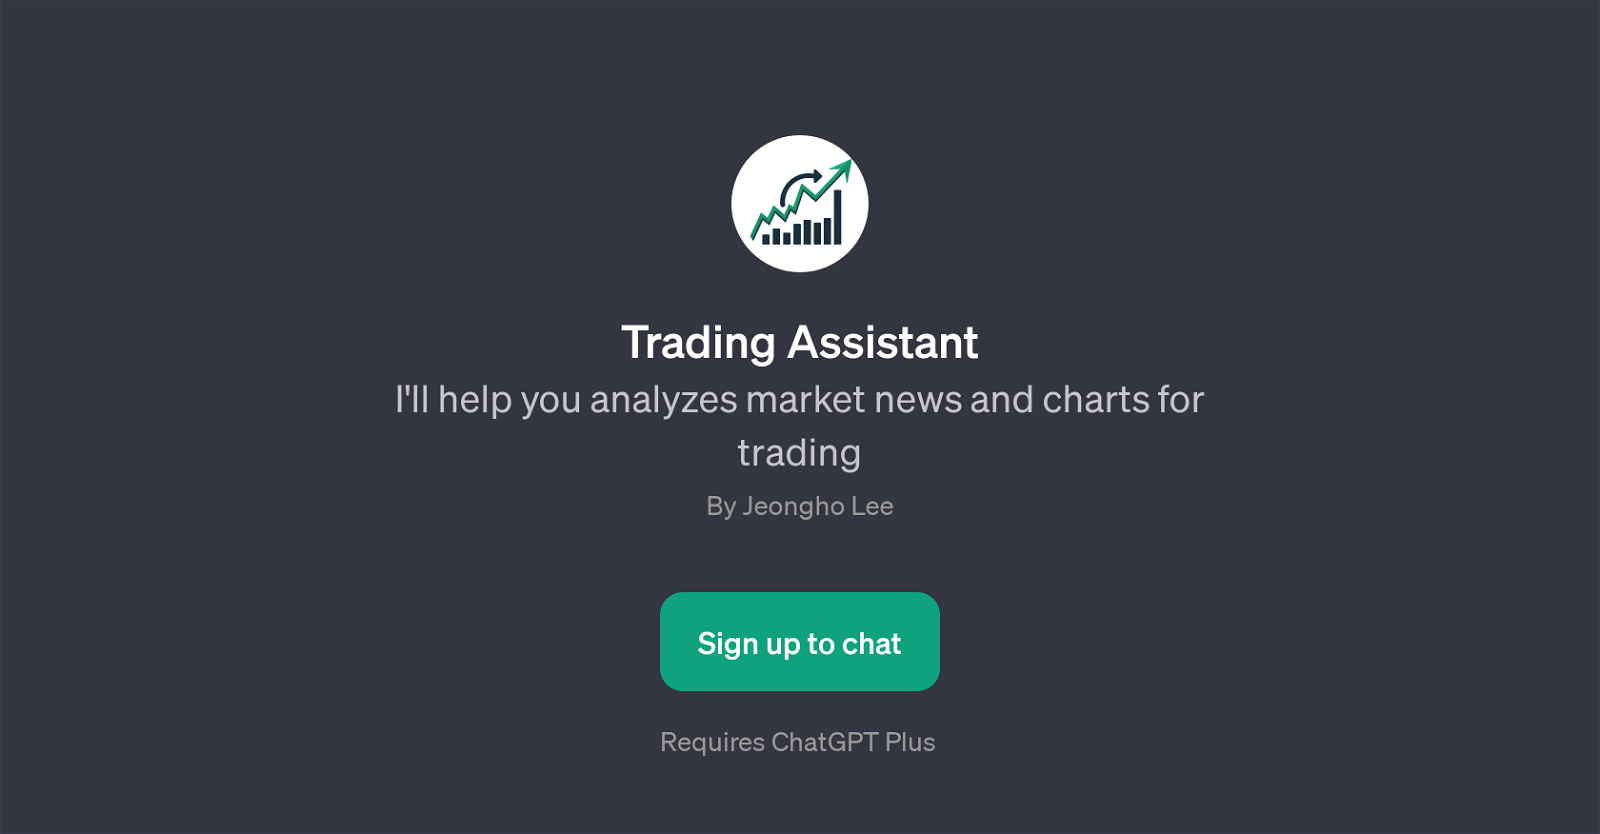 Trading Assistant website